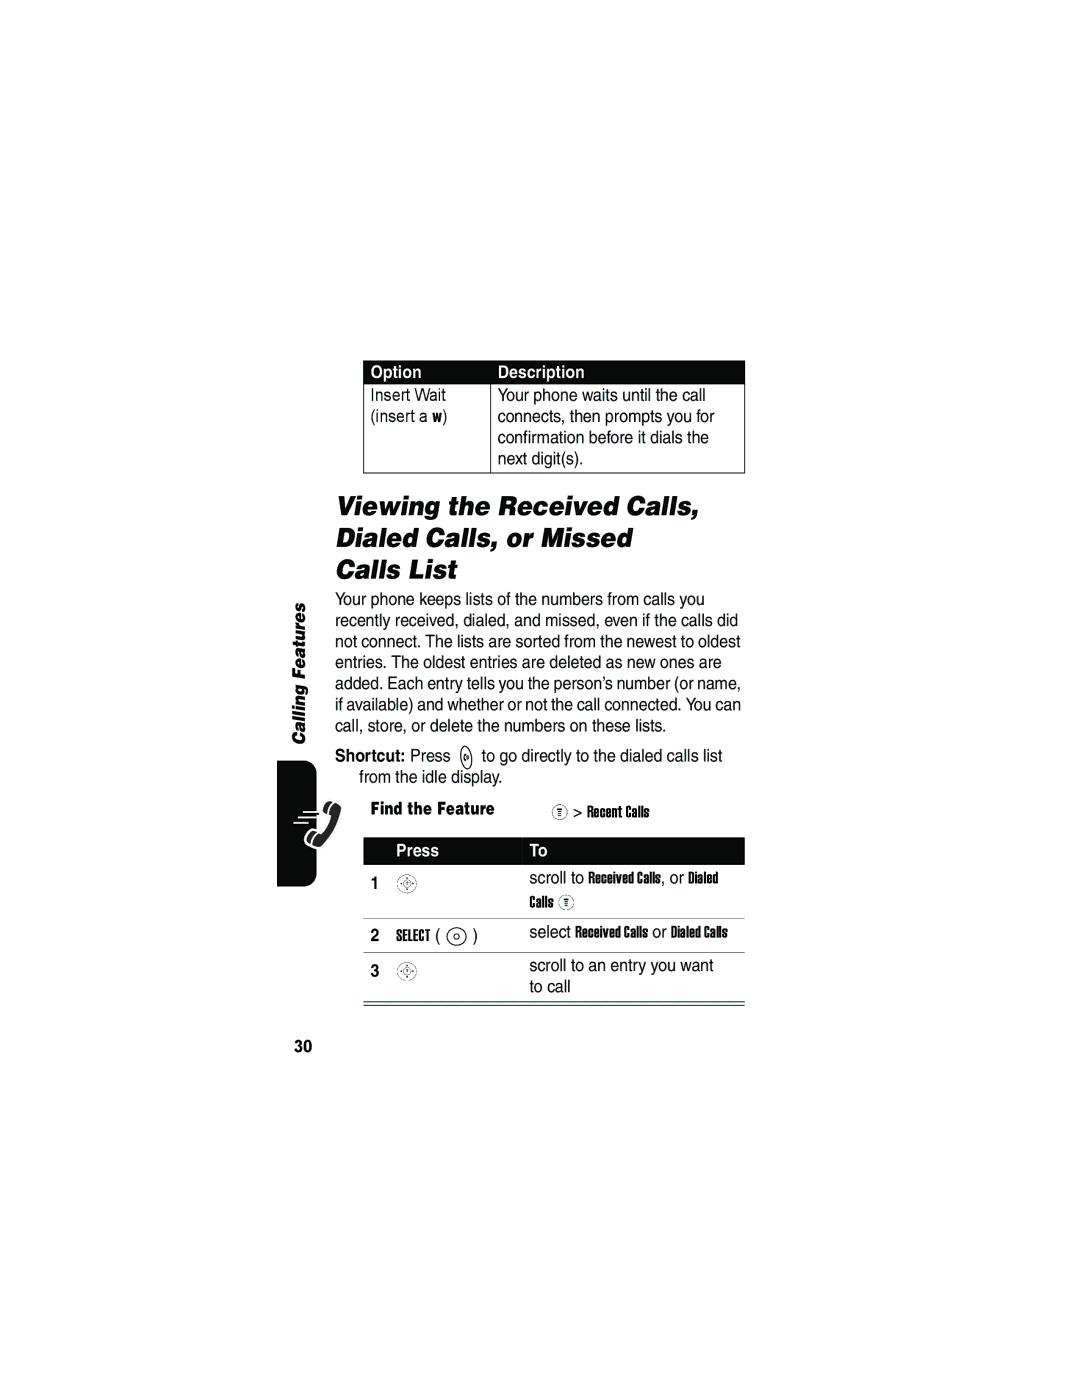 Motorola V173 manual Scroll to an entry you want, To call 